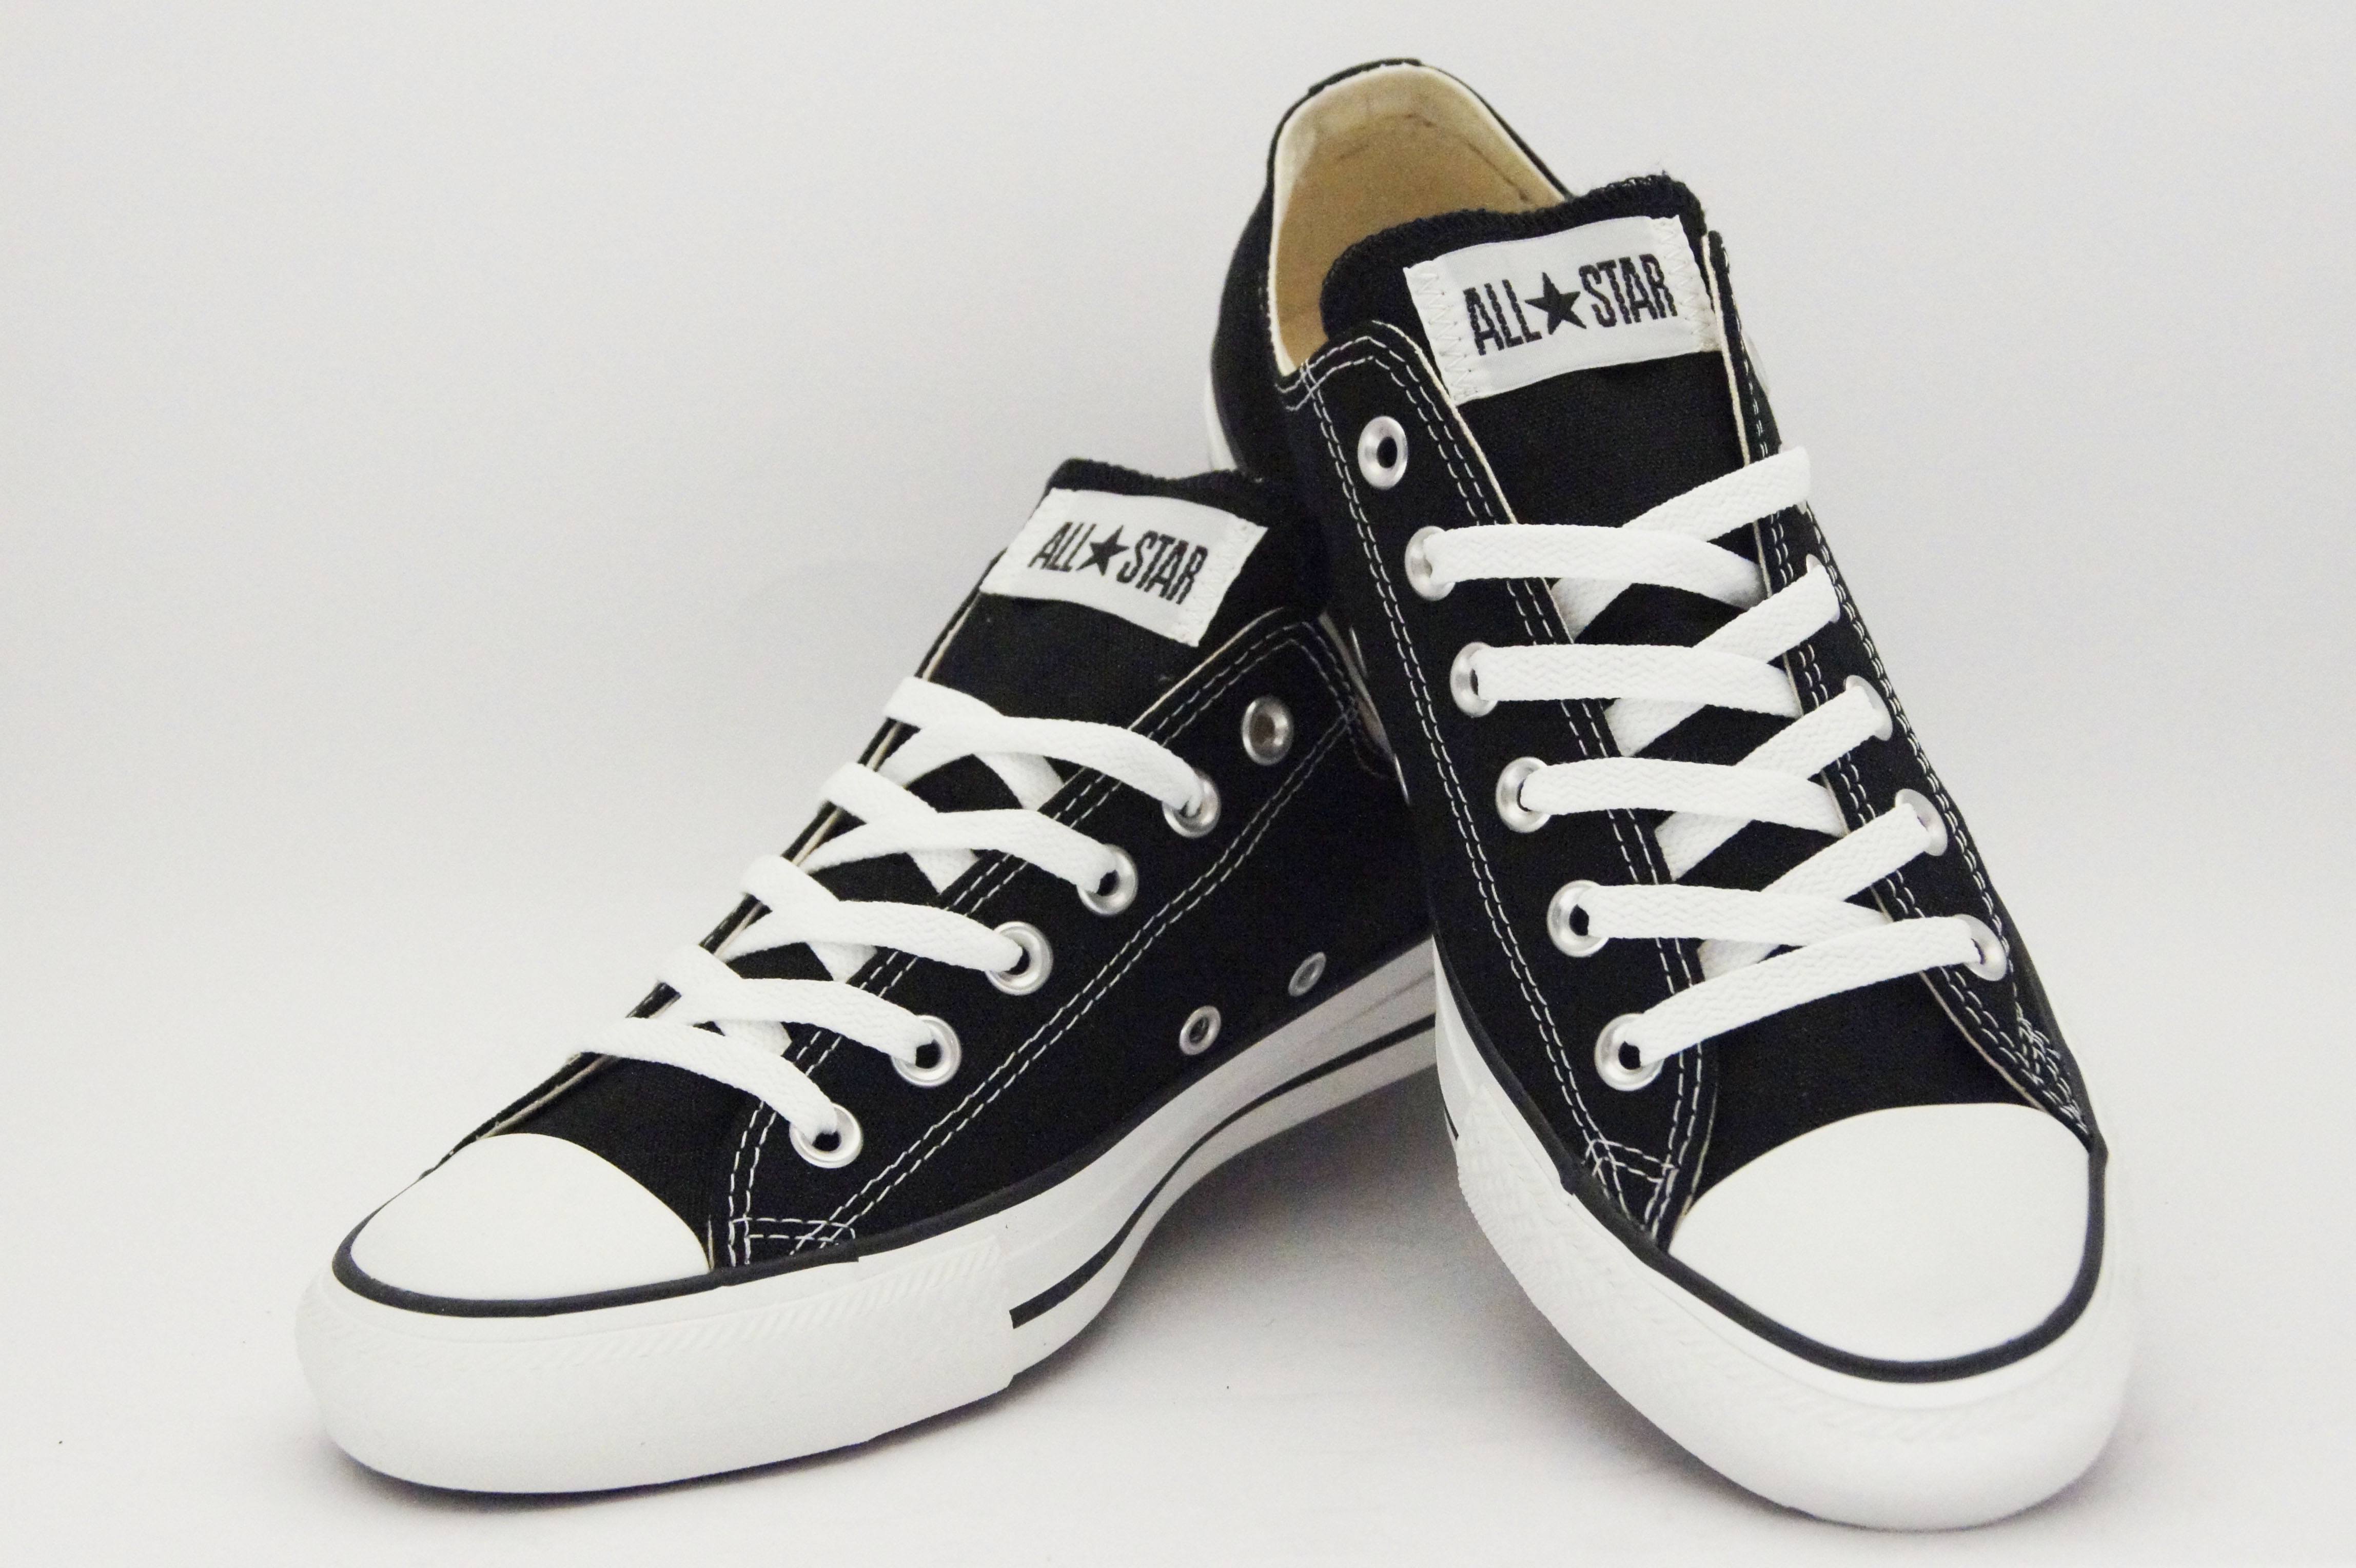 Converse All Star Black Lo - IGP Blog - Gift Ideas n More...